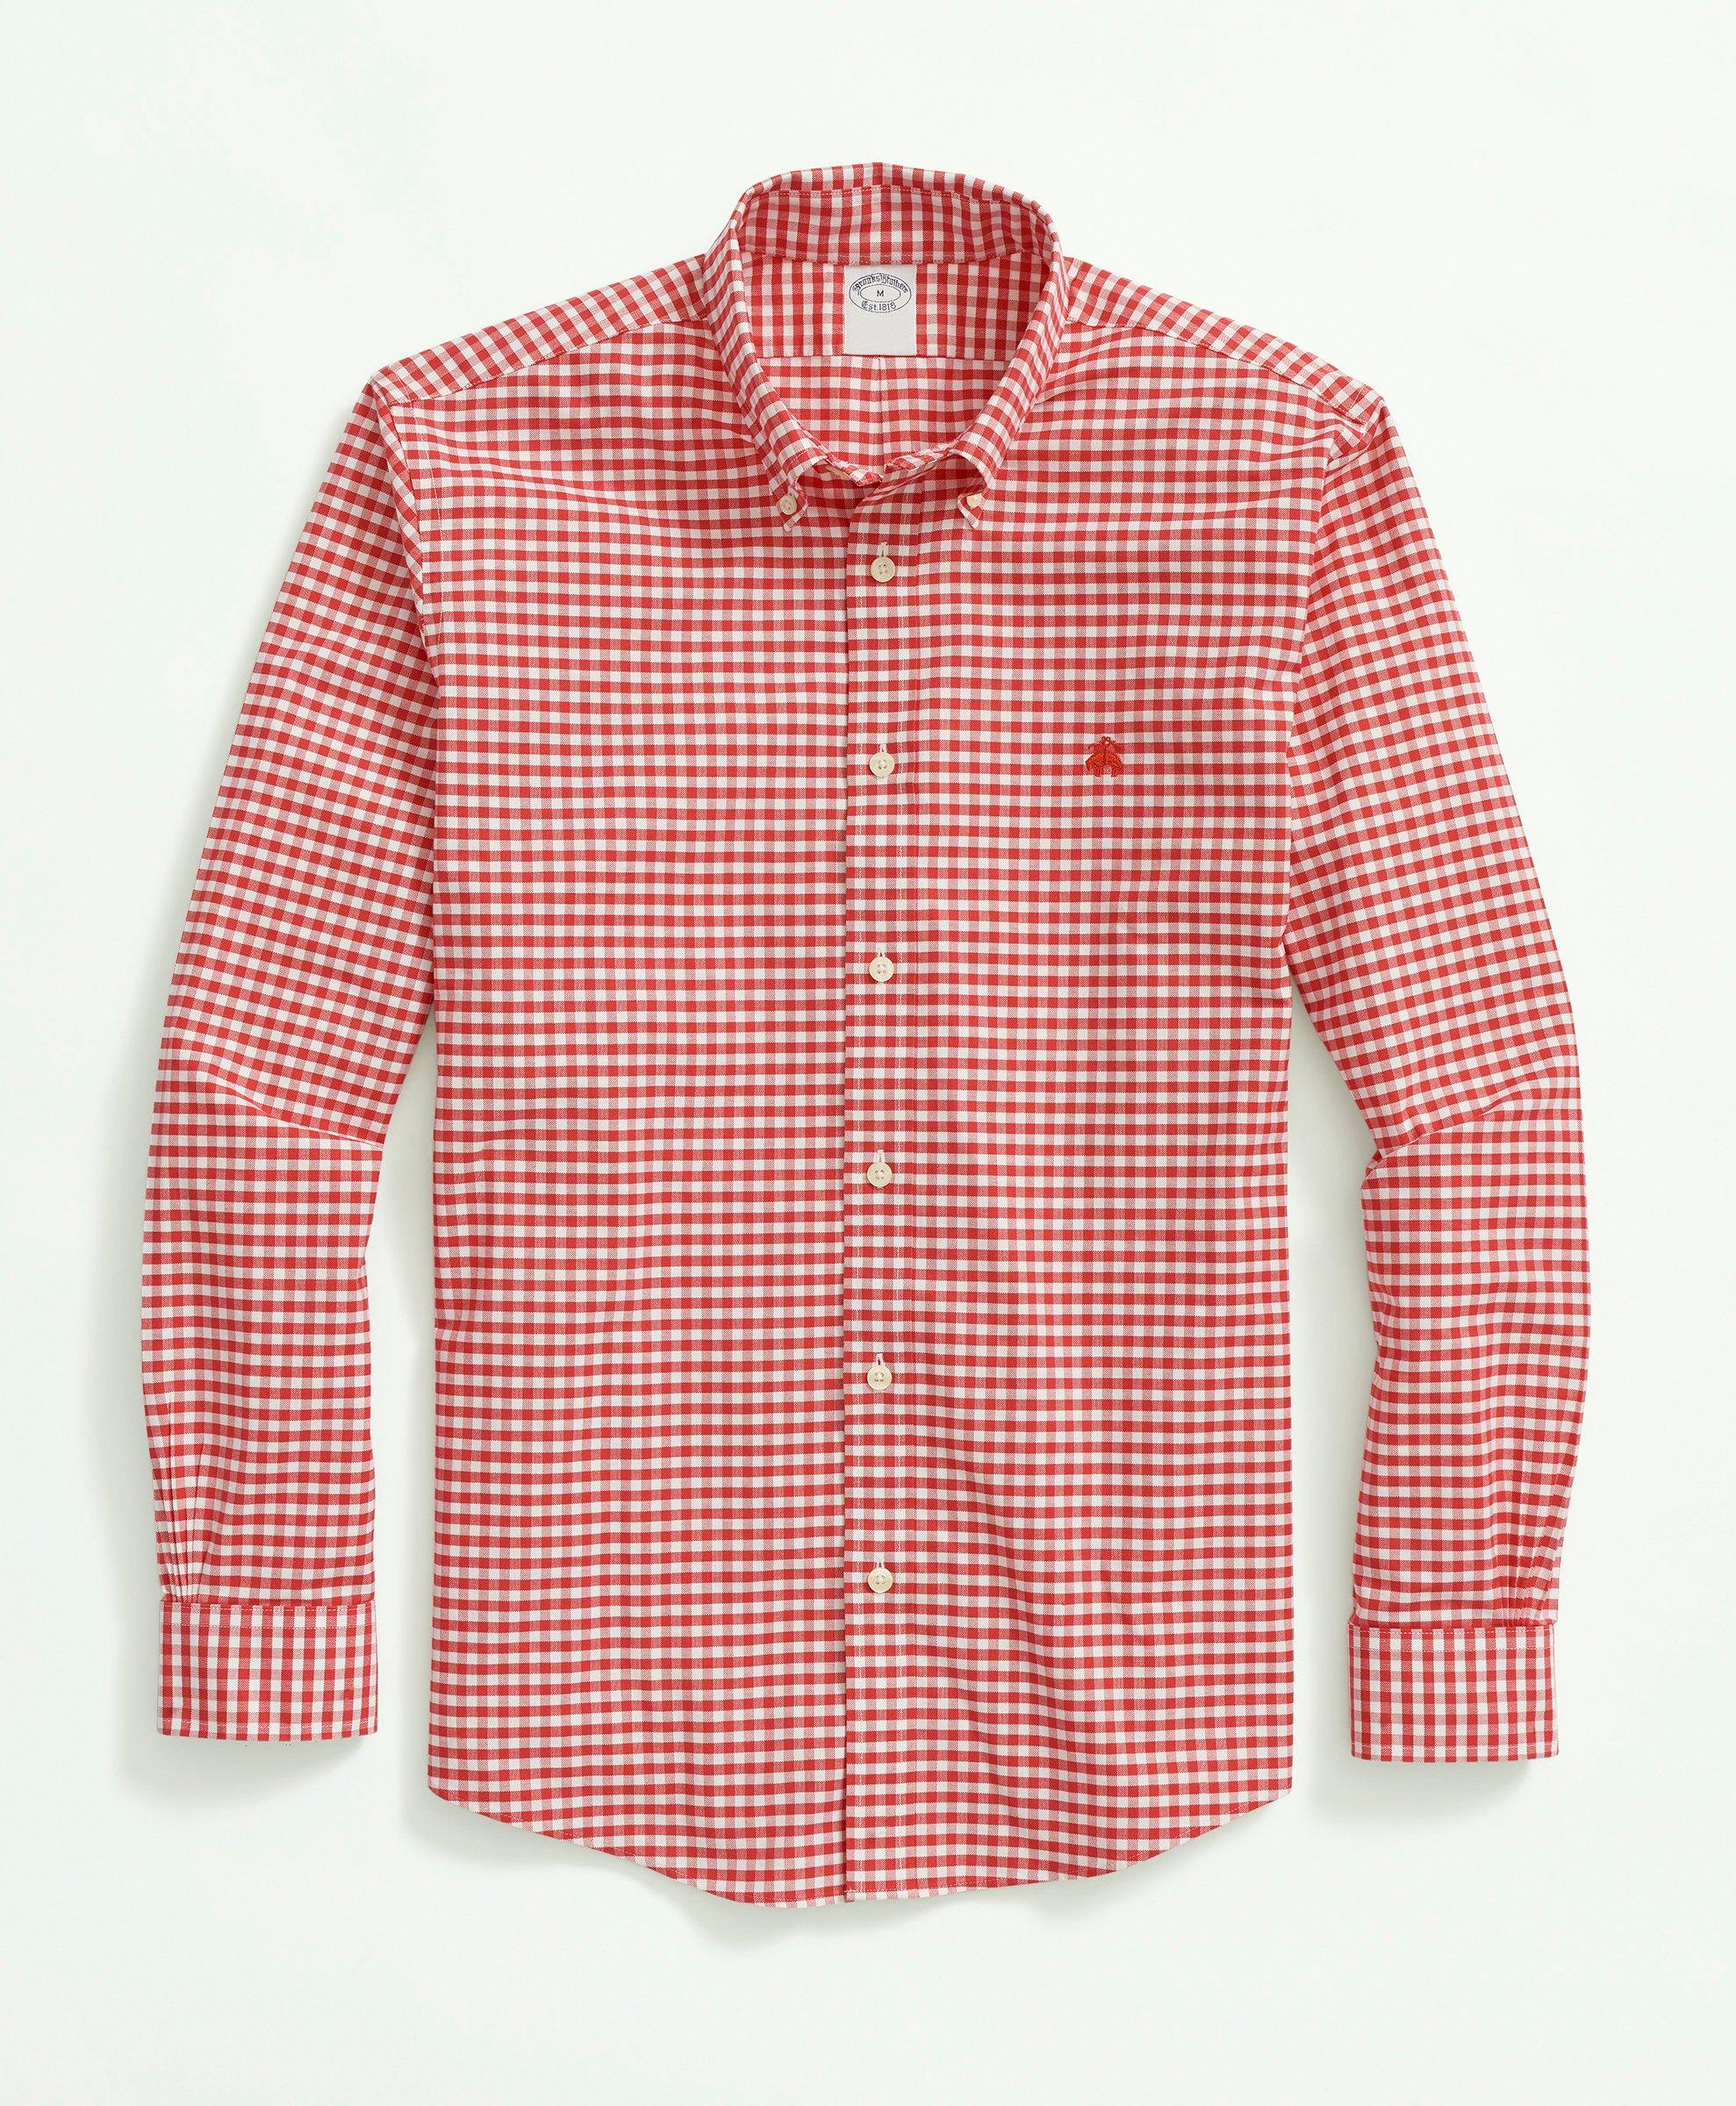 Brooks Brothers Stretch Non-iron Oxford Button-down Collar, Gingham Sport Shirt | Red | Size Xl